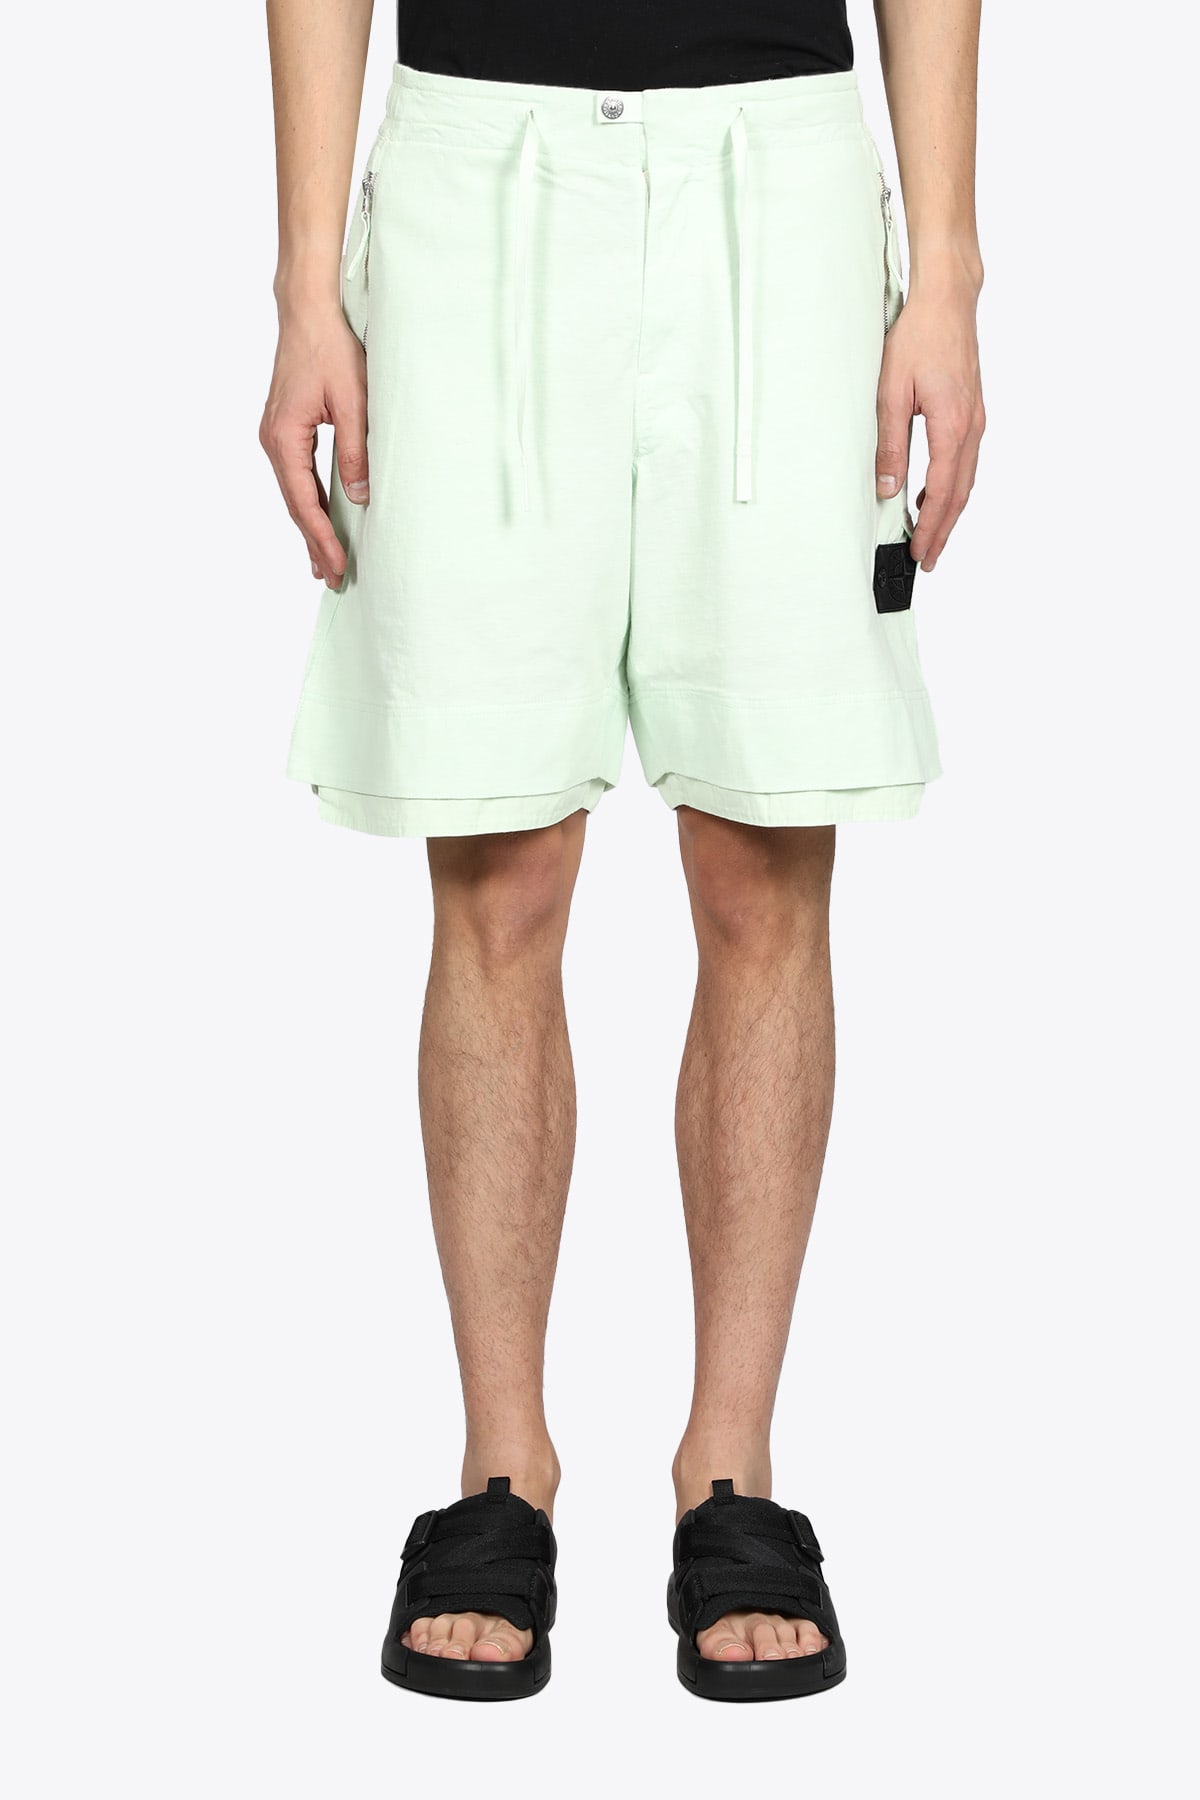 Stone Island Shadow Project Summer Shorts Chapter 2 Light green cotton bermuda with drawstring